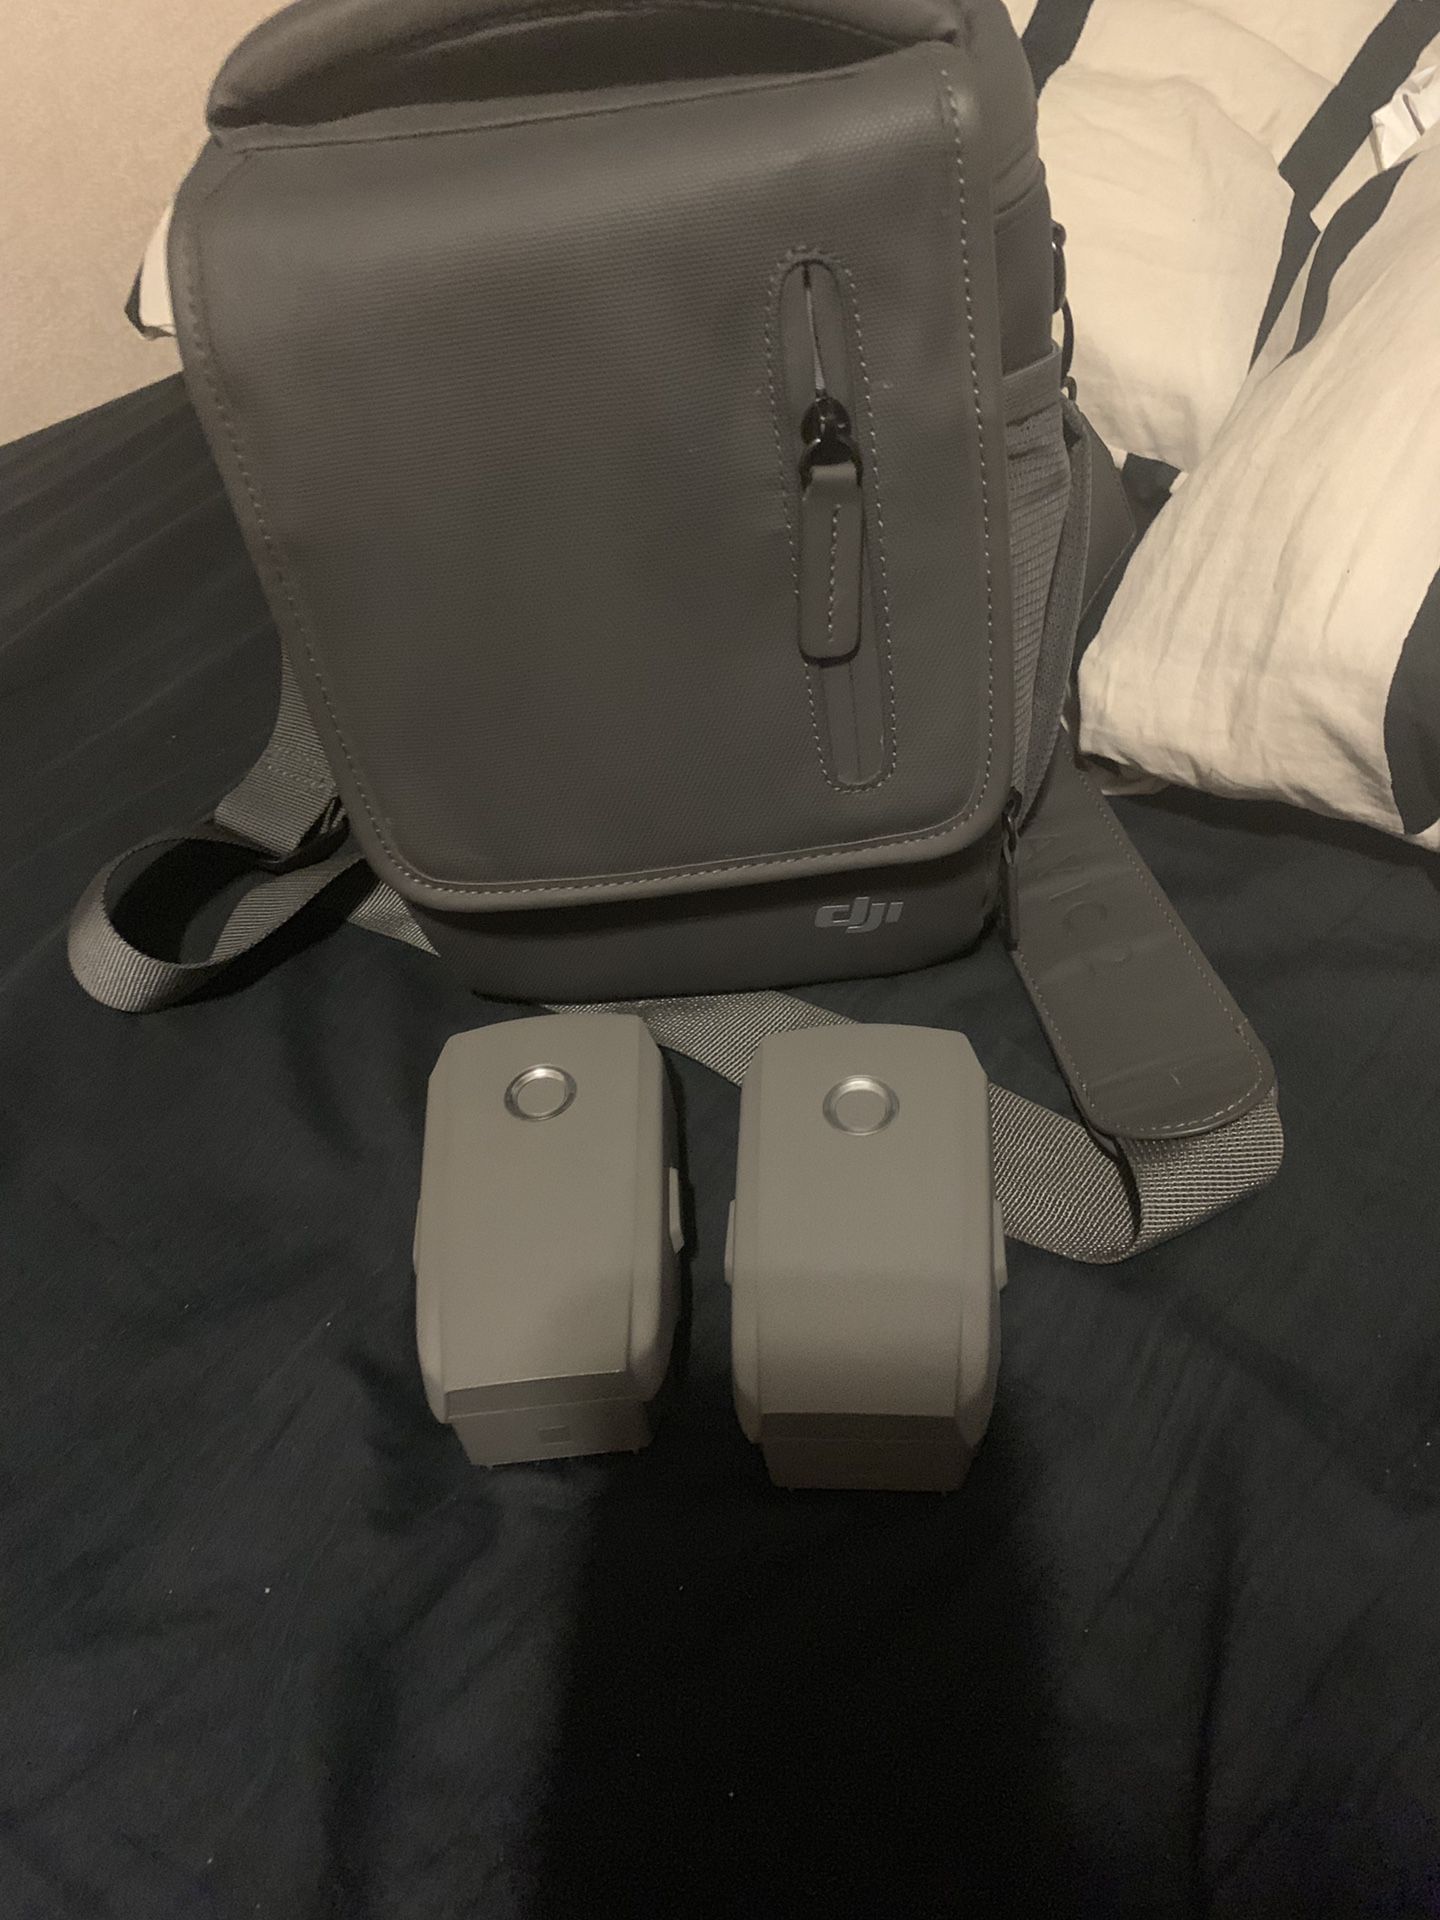 selling my mavic zoom 2 battery and the bag for $320 for all of them